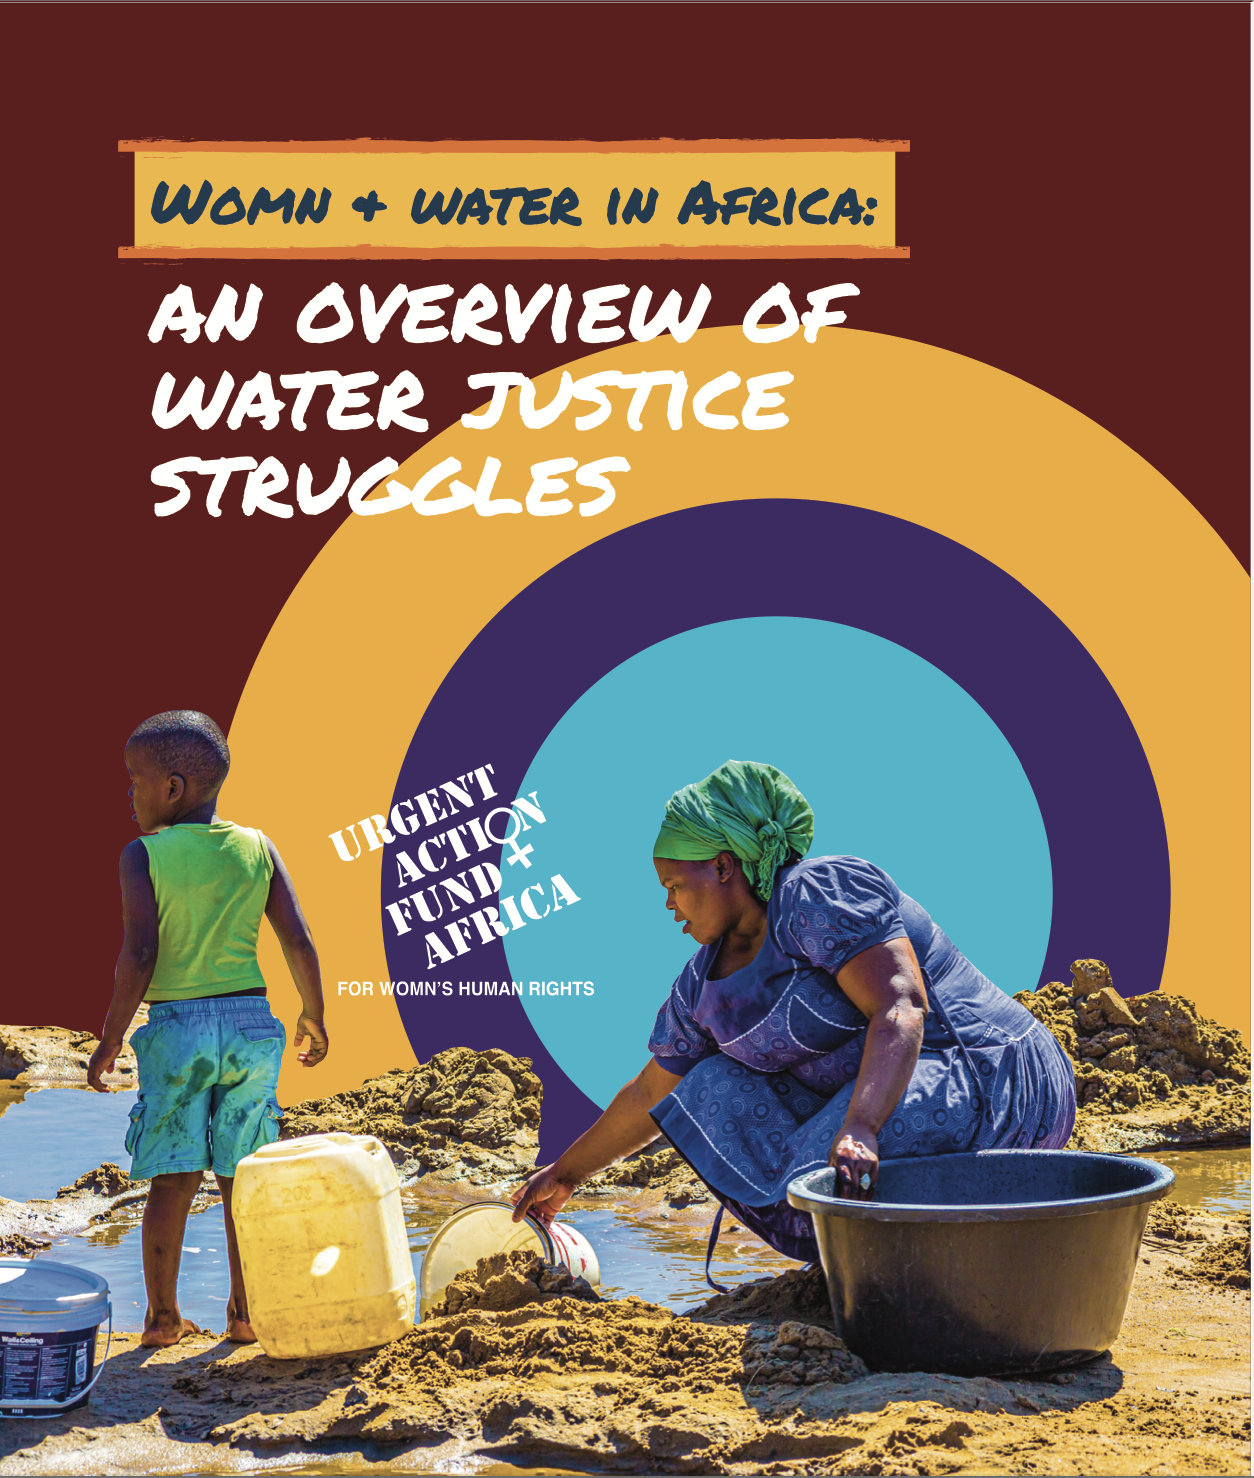 Womn and Water in Africa: An Overview of Water Justice Struggles